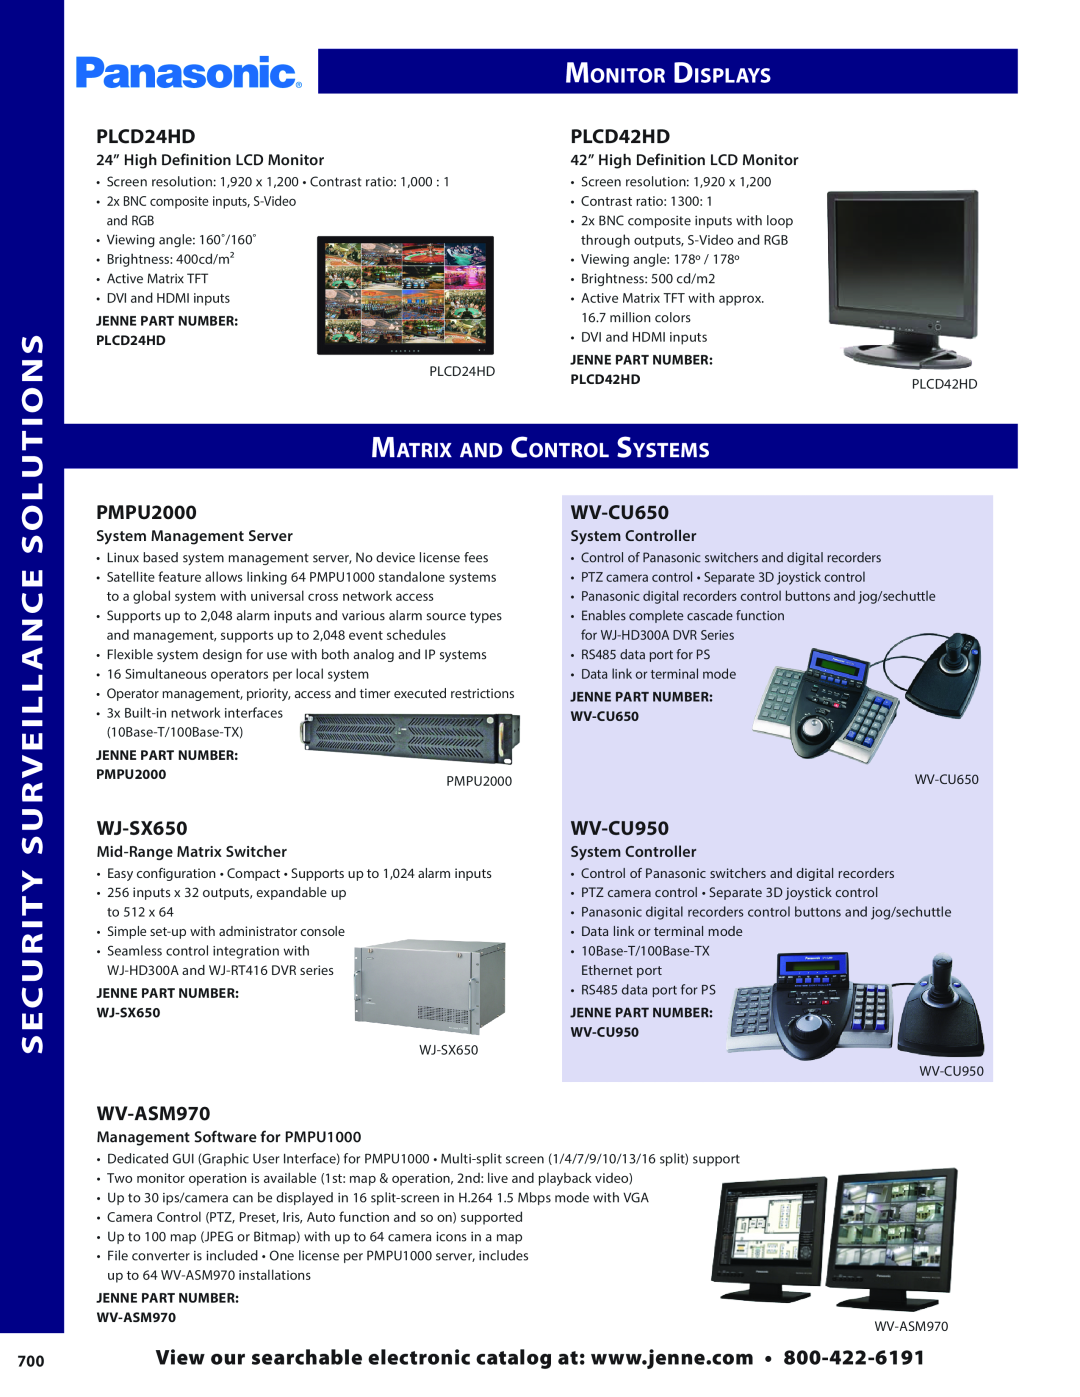 Panasonic PMPU2000 Security Surveillance Solutions, Matrix and Control Systems, Monitor Displays, System Management Server 